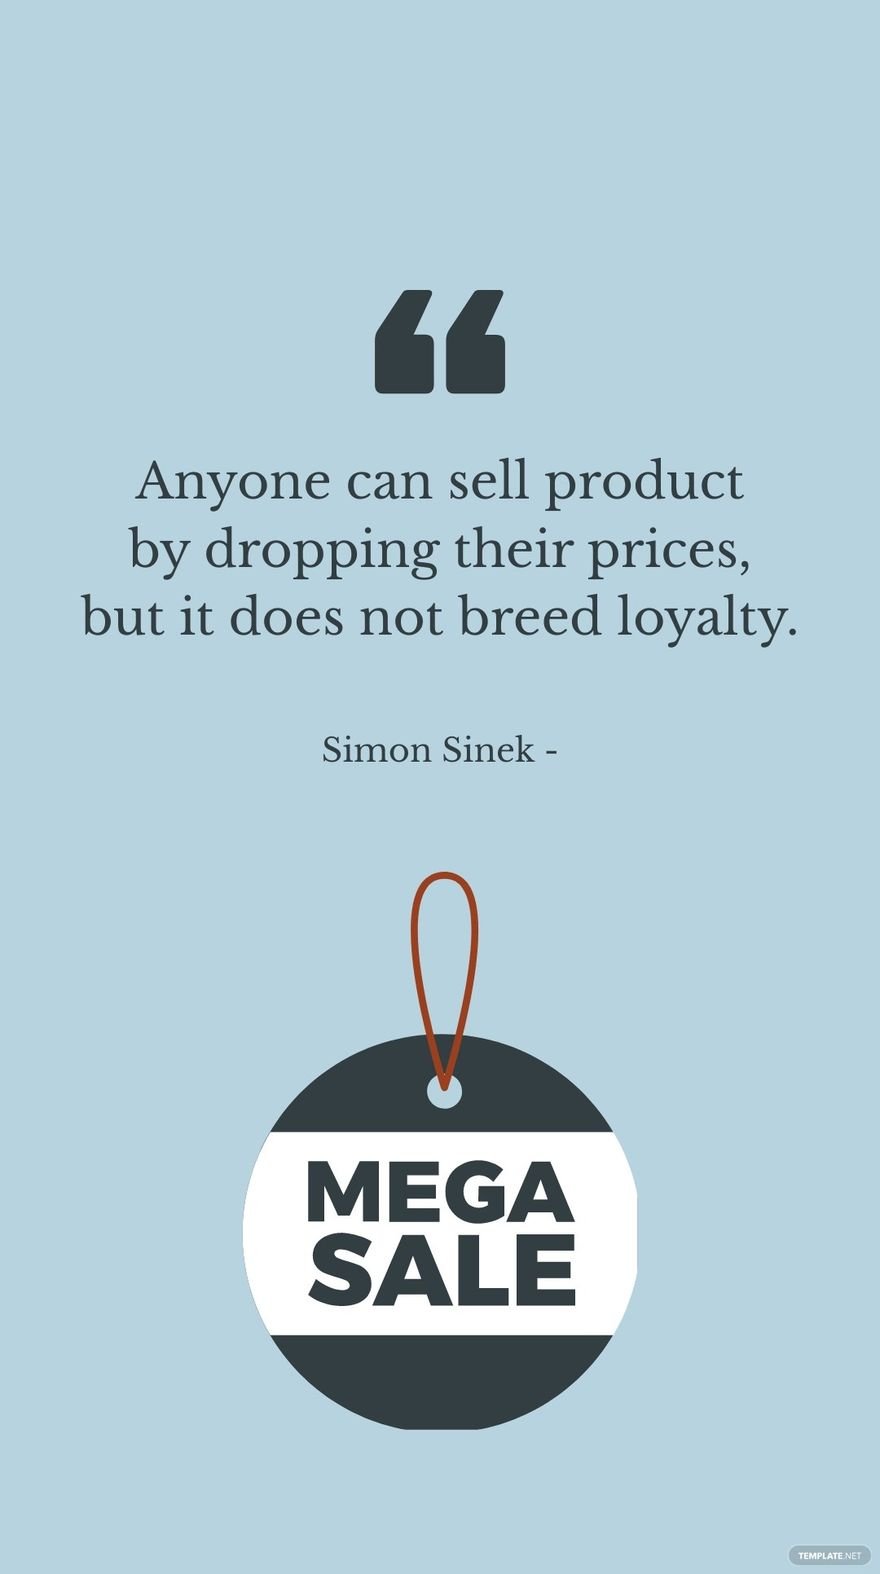 Free Simon Sinek - Anyone can sell product by dropping their prices, but it does not breed loyalty. in JPG